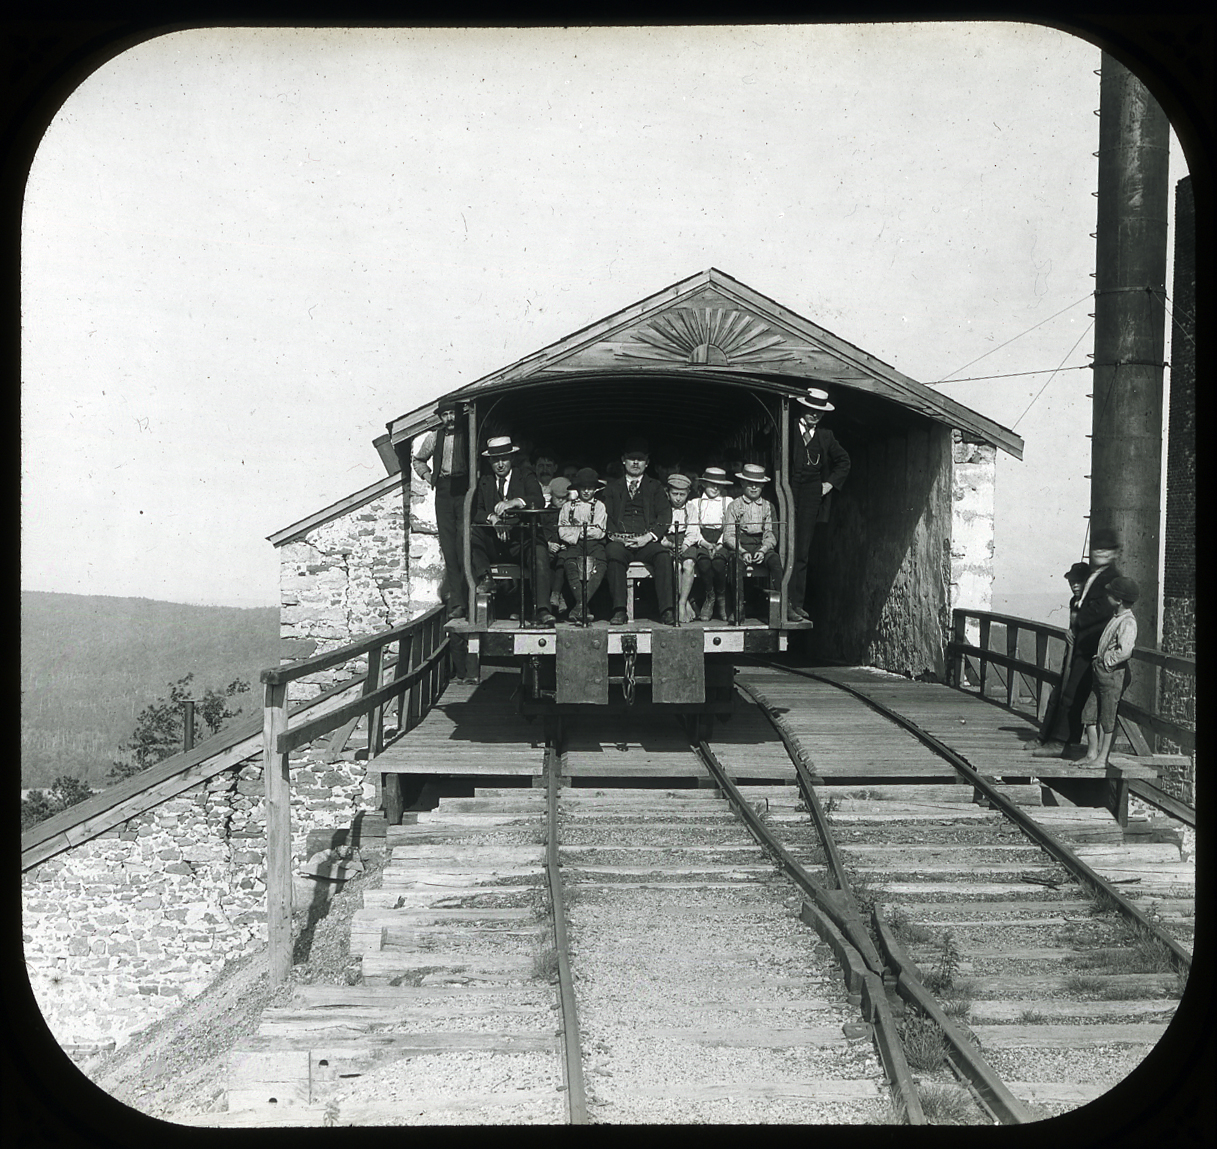 Black and white image of passengers in an open-backed train car.